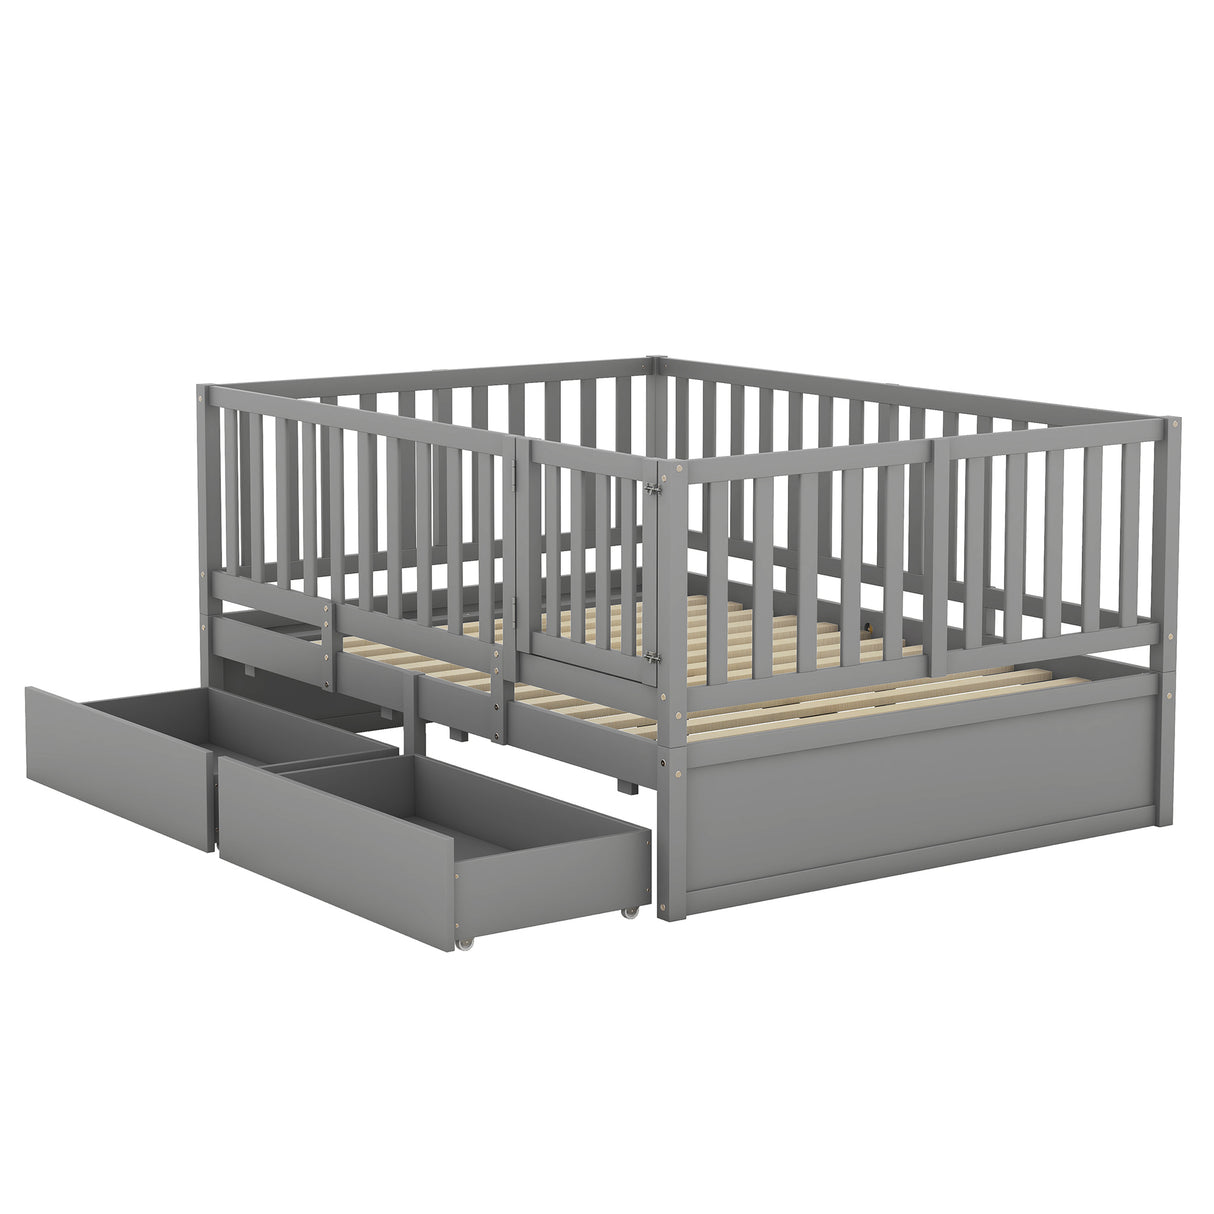 Full Size Wood Daybed with Fence Guardrails and 2 Drawers, Used as Independent Floor Bed & Daybed, Gray - Home Elegance USA